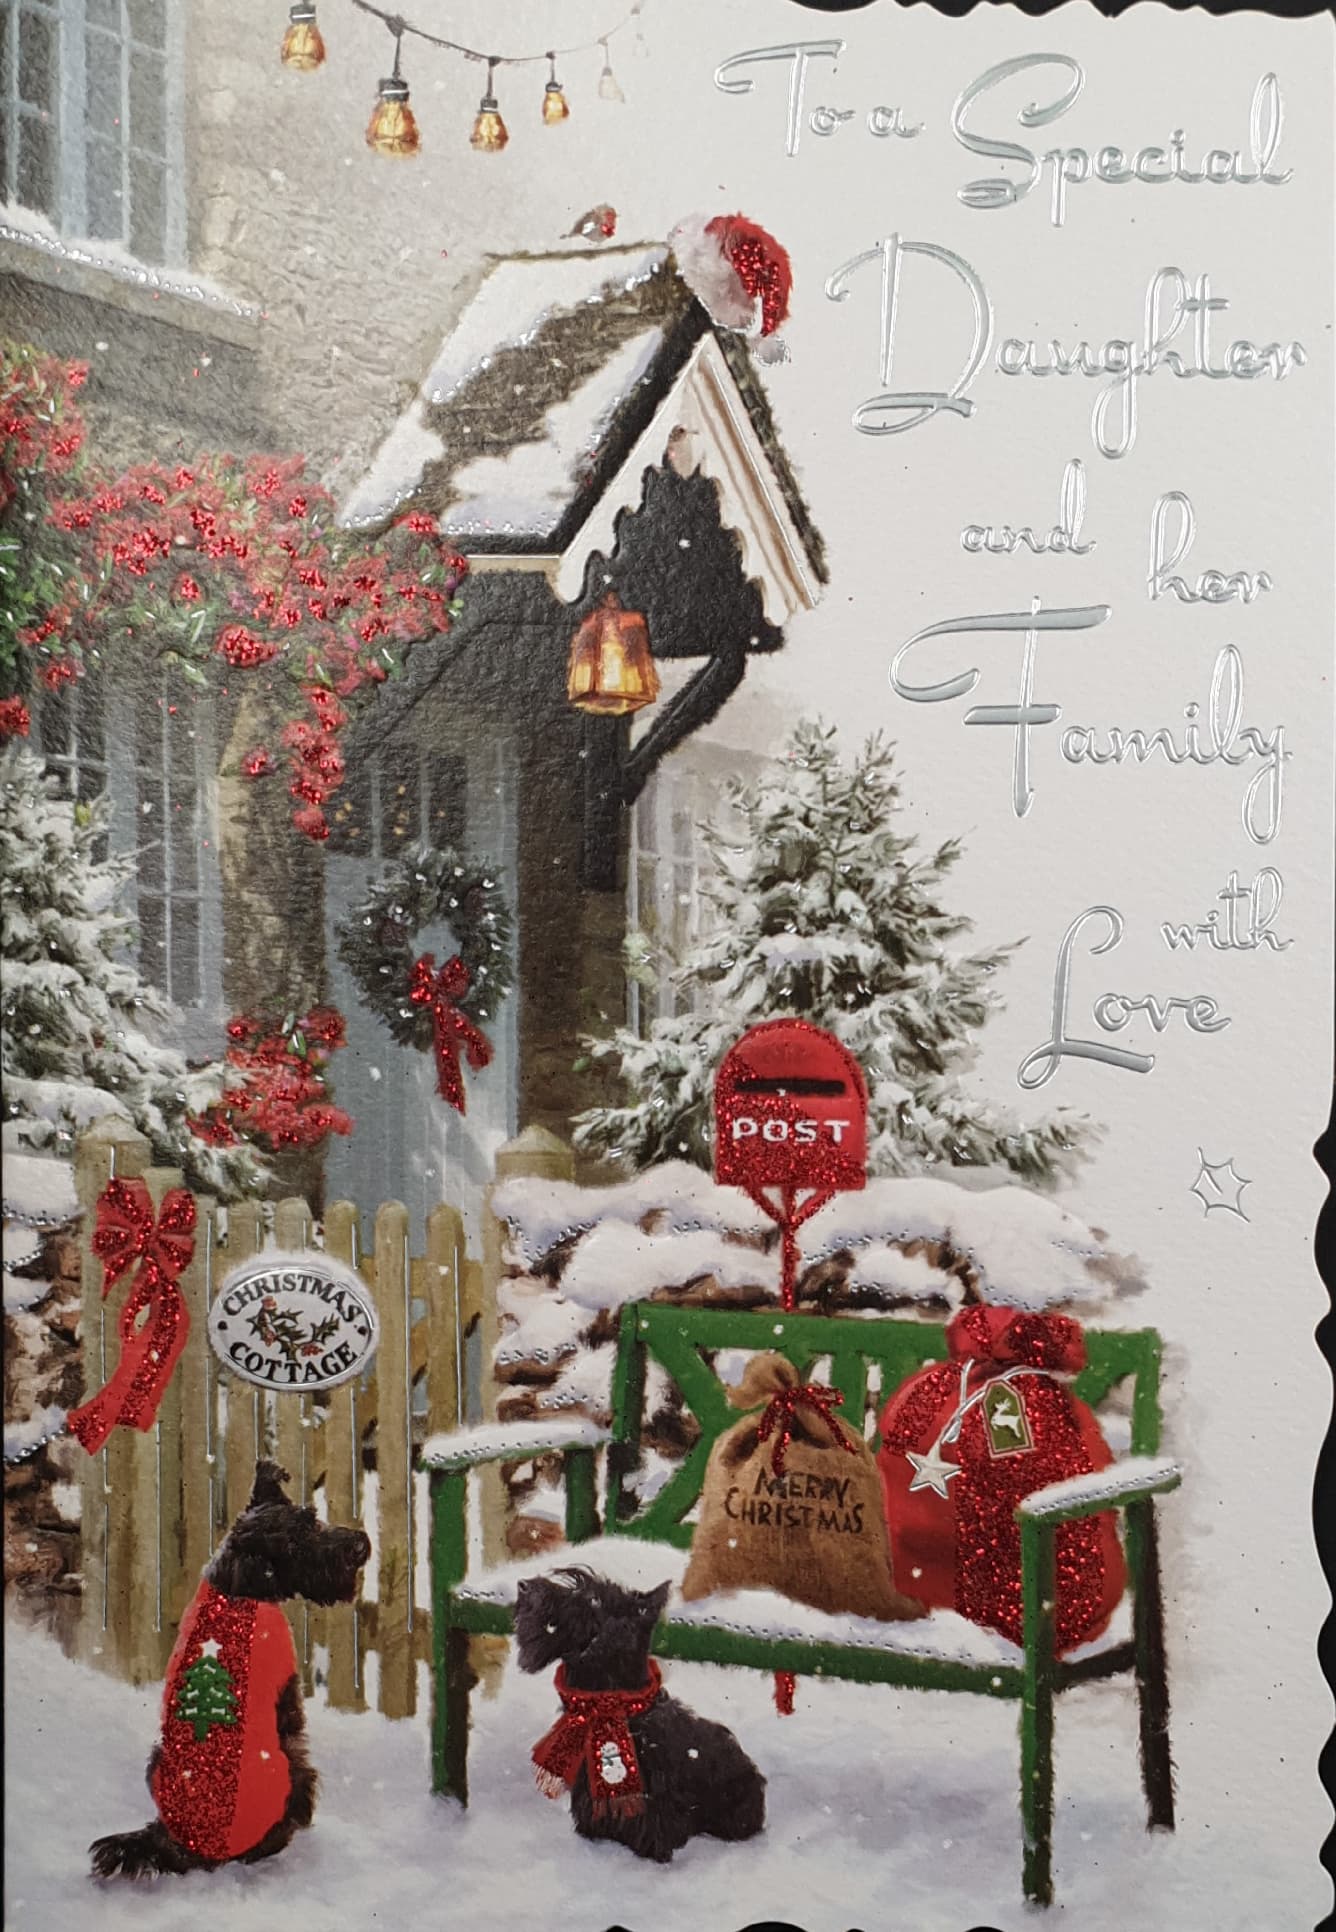 Daughter & Her Family Christmas Card - Puppies in Snow Beside Decorated Cottage